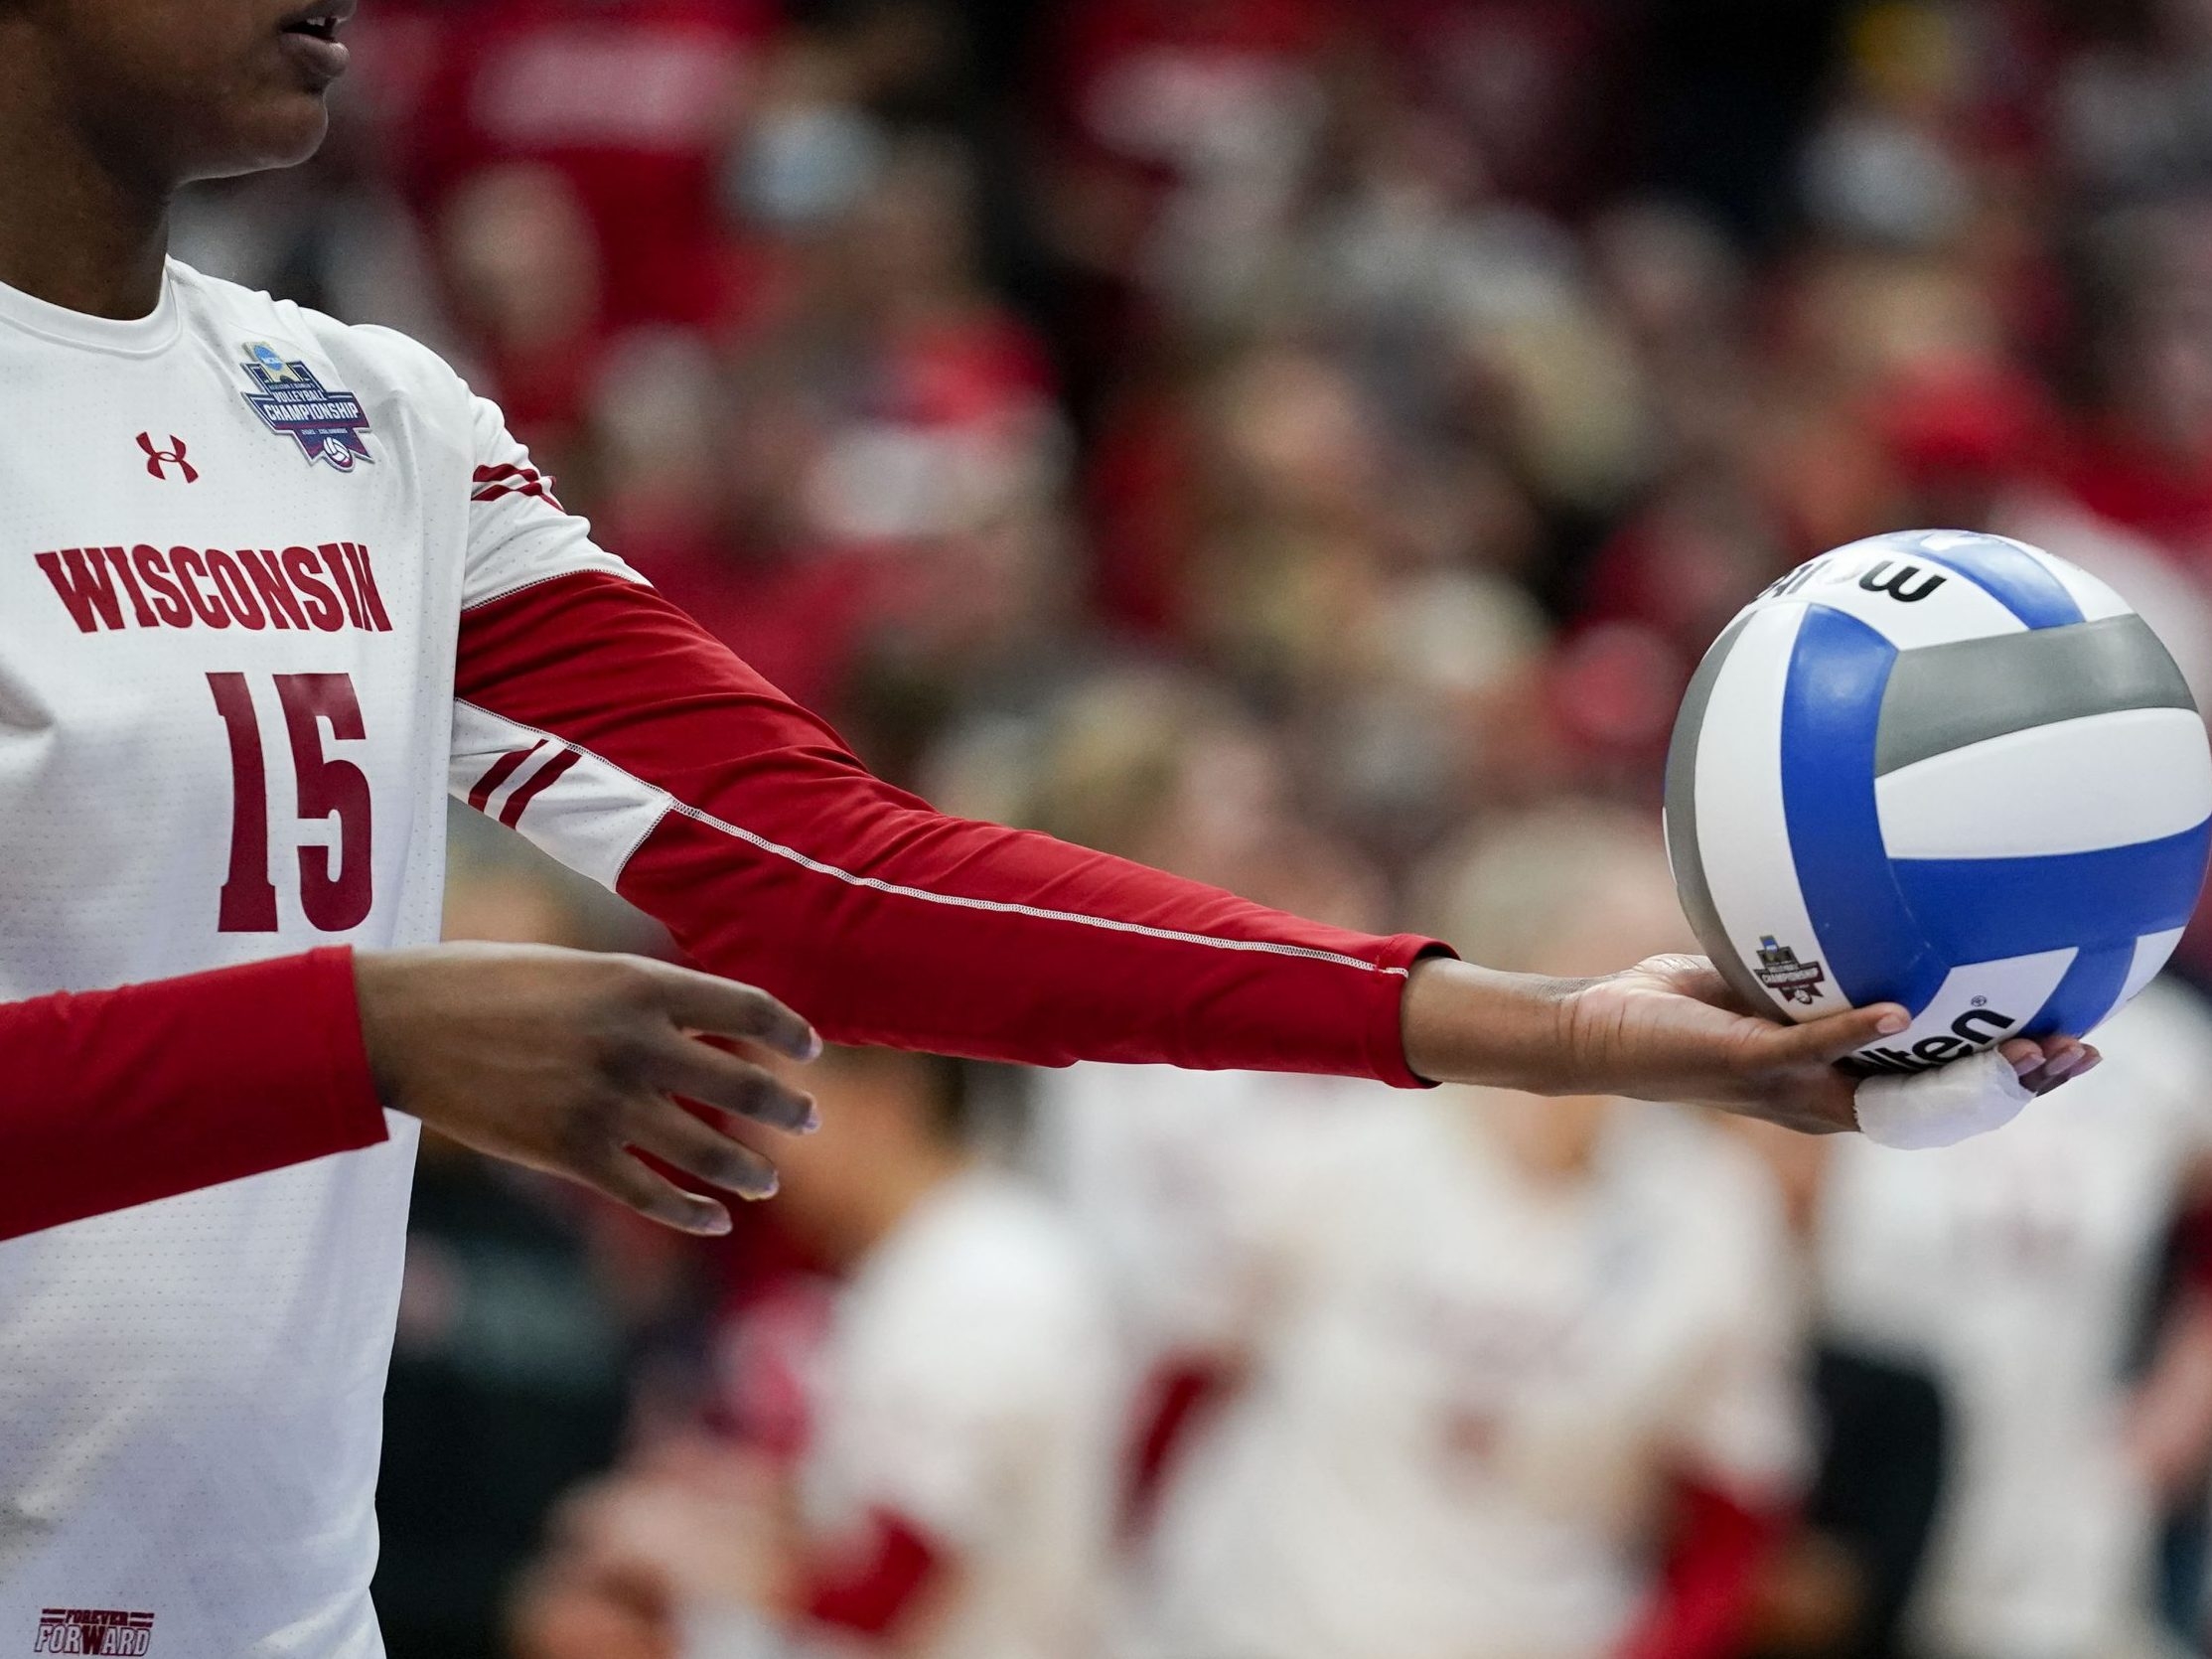 Leaked photos of Wisconsin volleyball team came from player’s phone